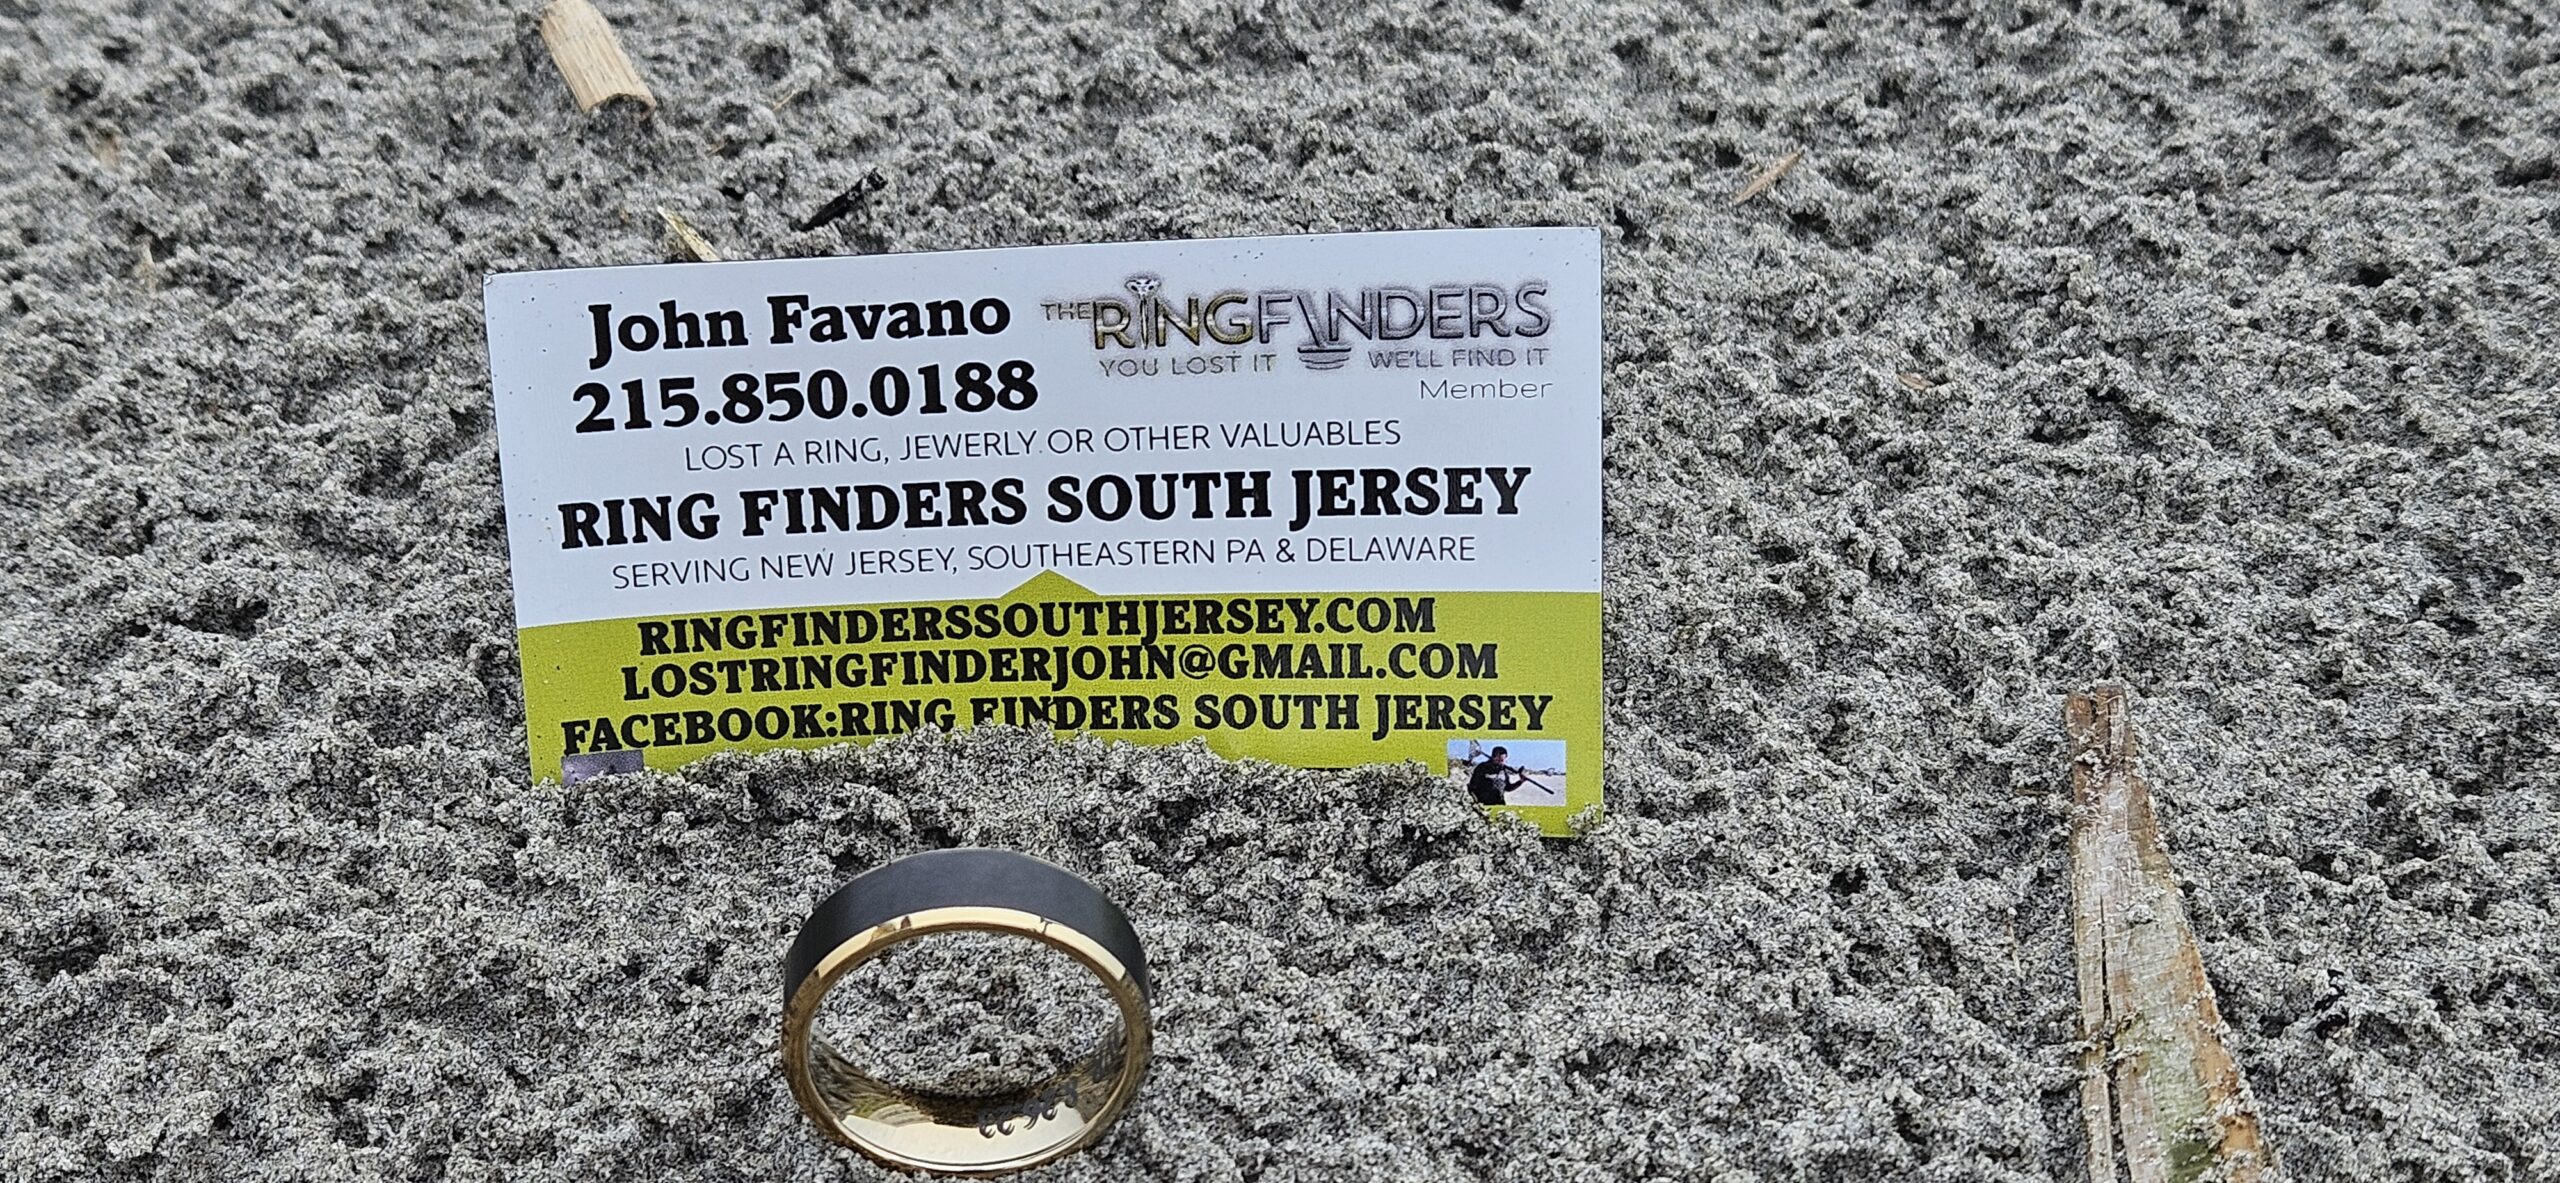 Jersey shore ring finder,  nj ring finder,  Cape may,  Wildwood NJ 